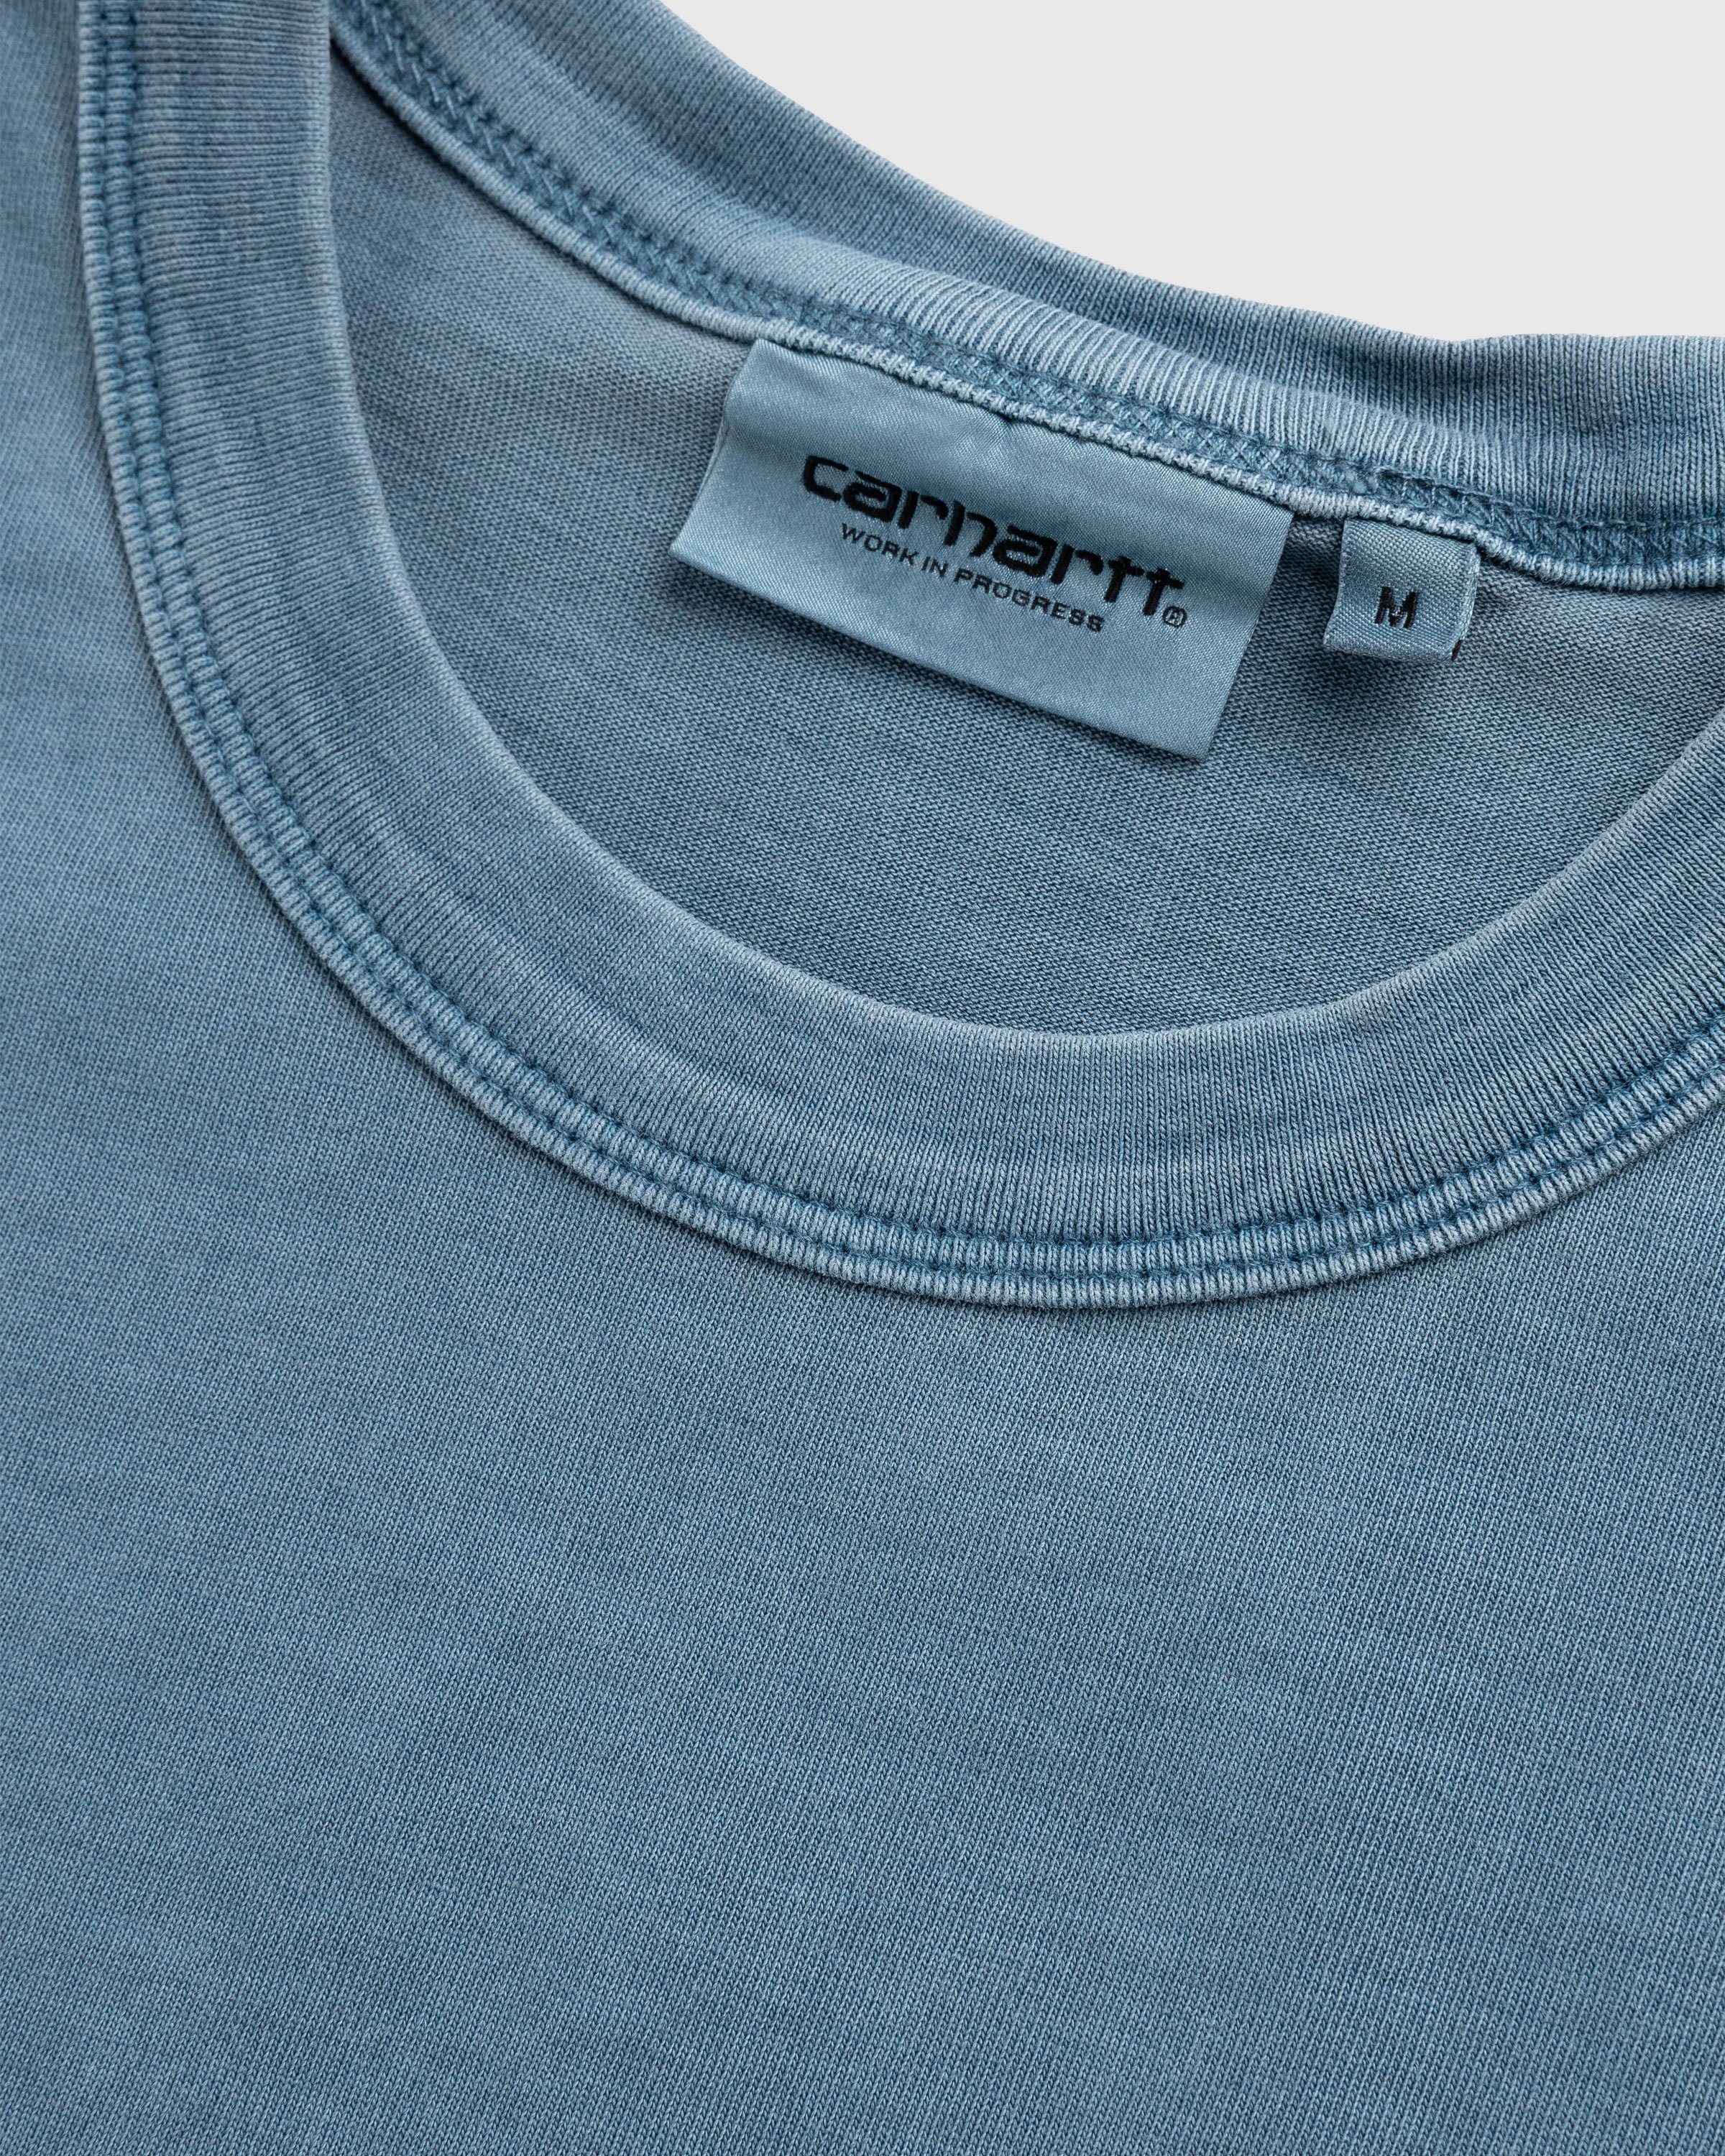 Carhartt WIP - S/S Taos T-Shirt Vancouver Blue/Garment-Dyed - Clothing - Blue - Image 6